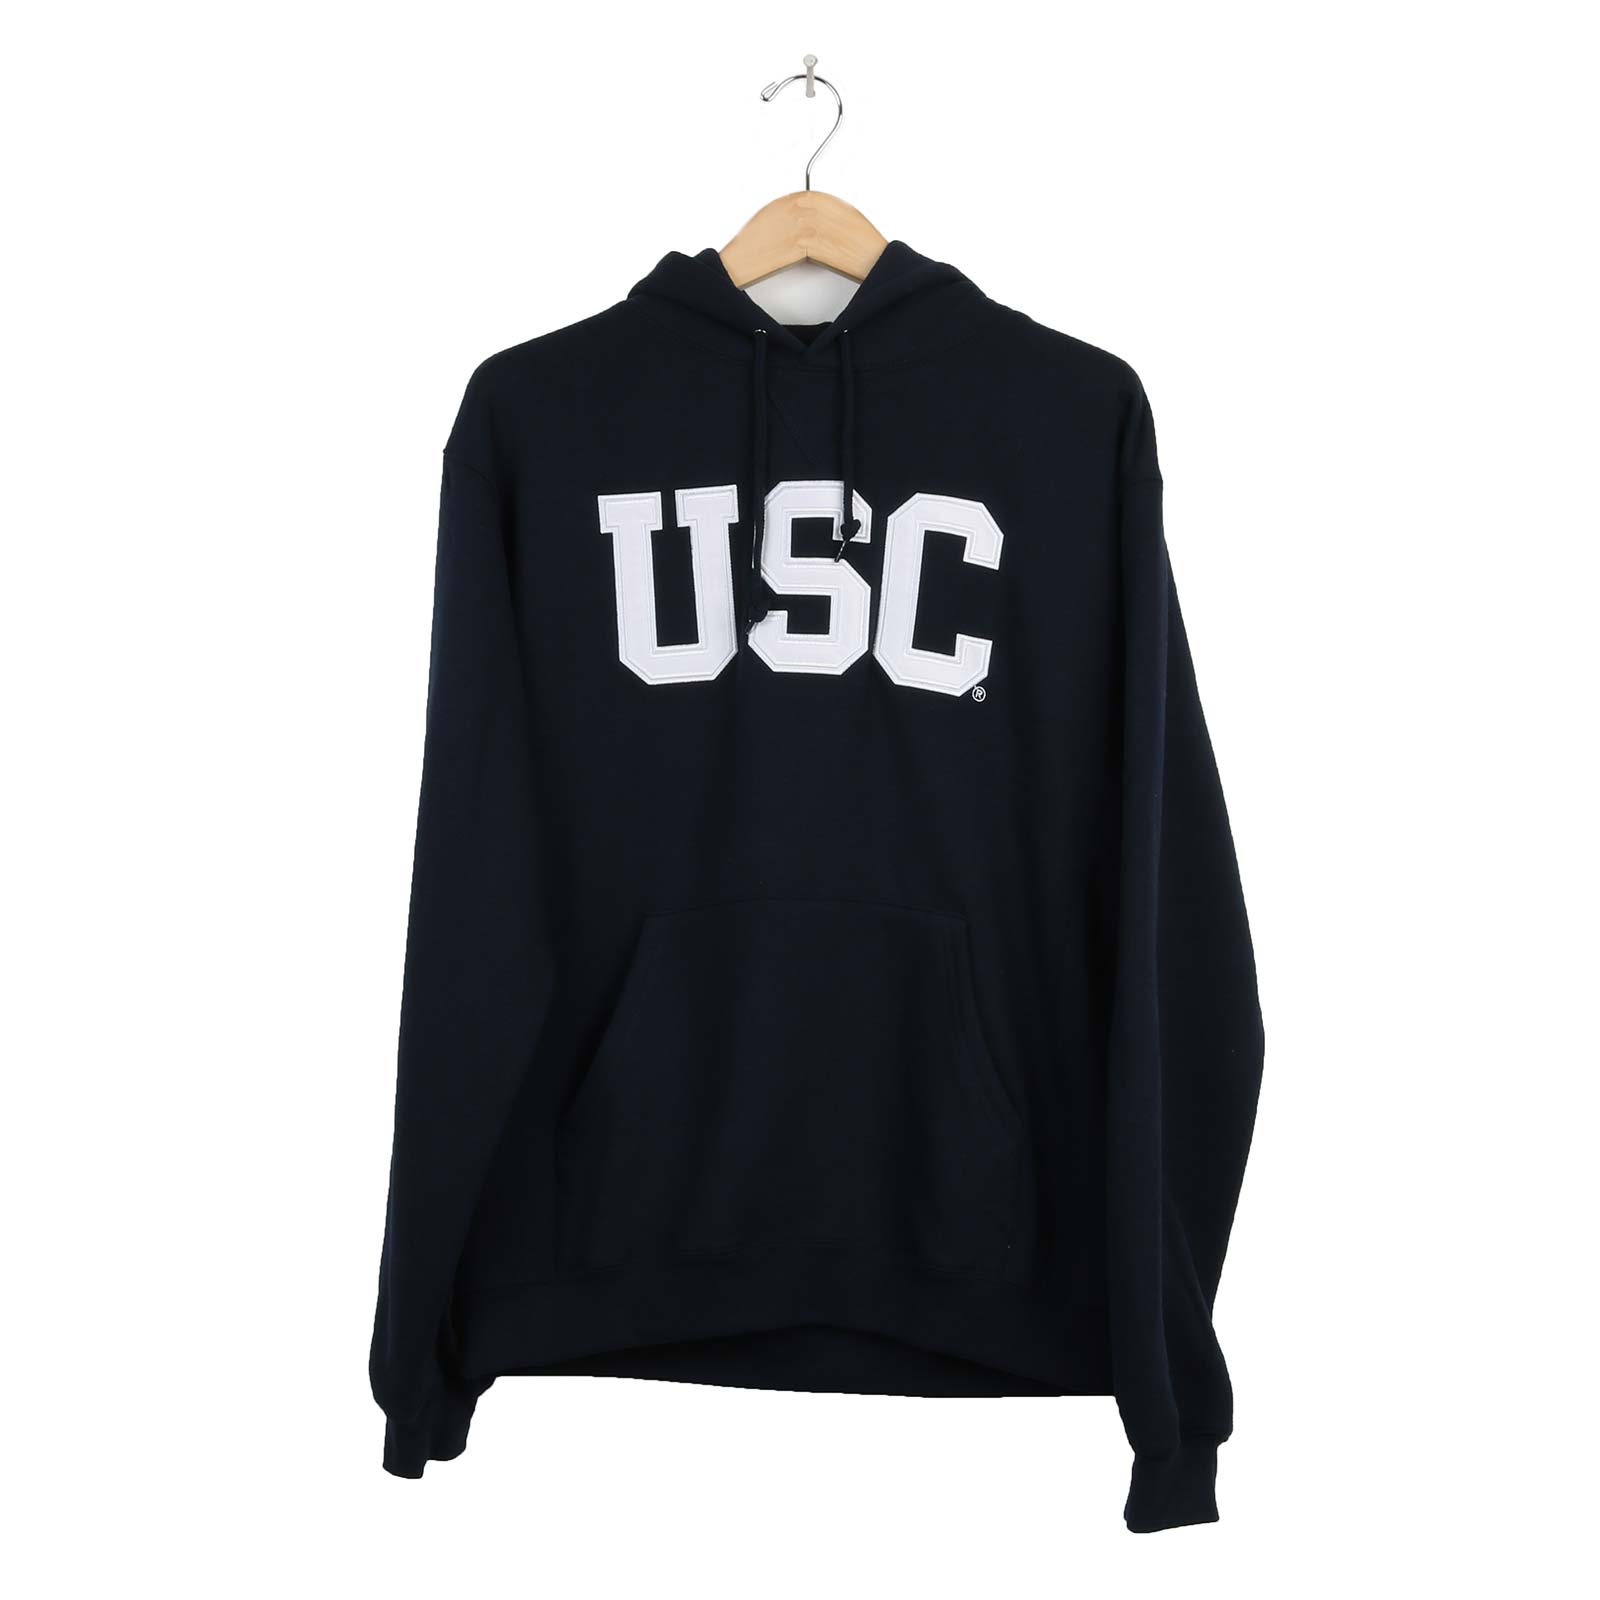 USC Arch TT Pullover Hoodie Navy image01